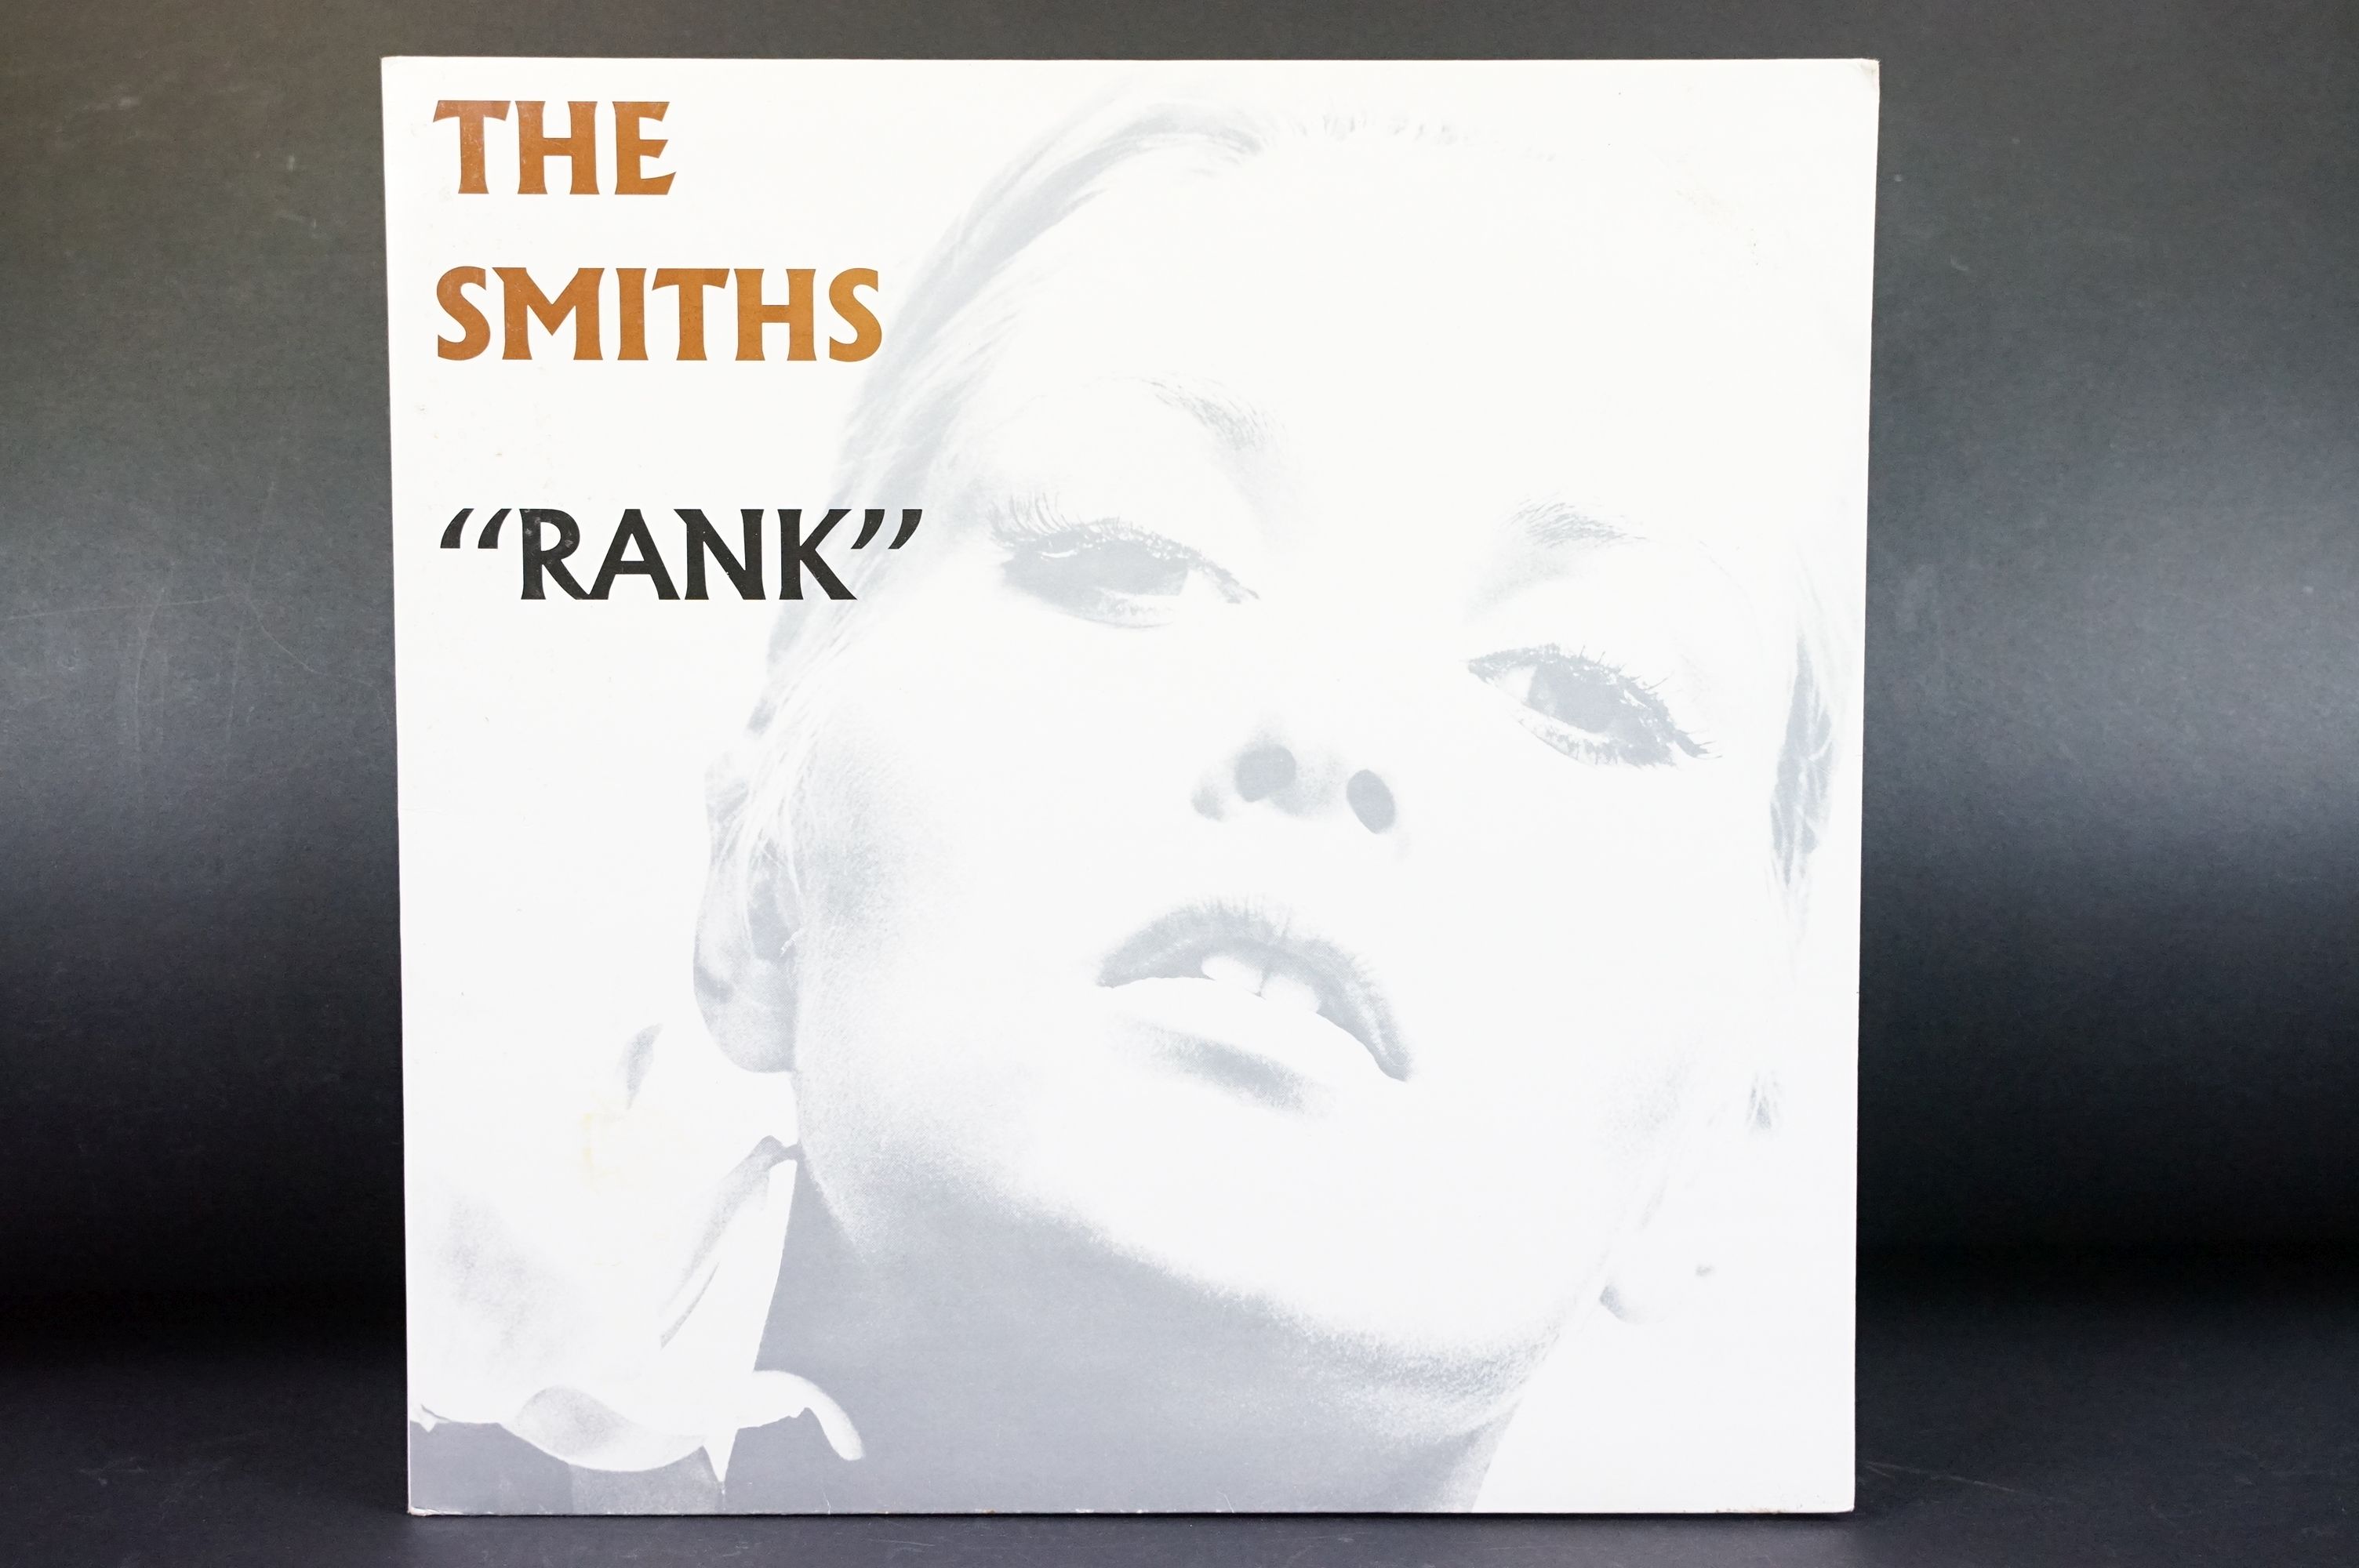 Vinyl - 3 The Smiths / Morrissey LPs to include Rank (Rough 126), Louder Than Bombs (Rough 255), - Image 2 of 17